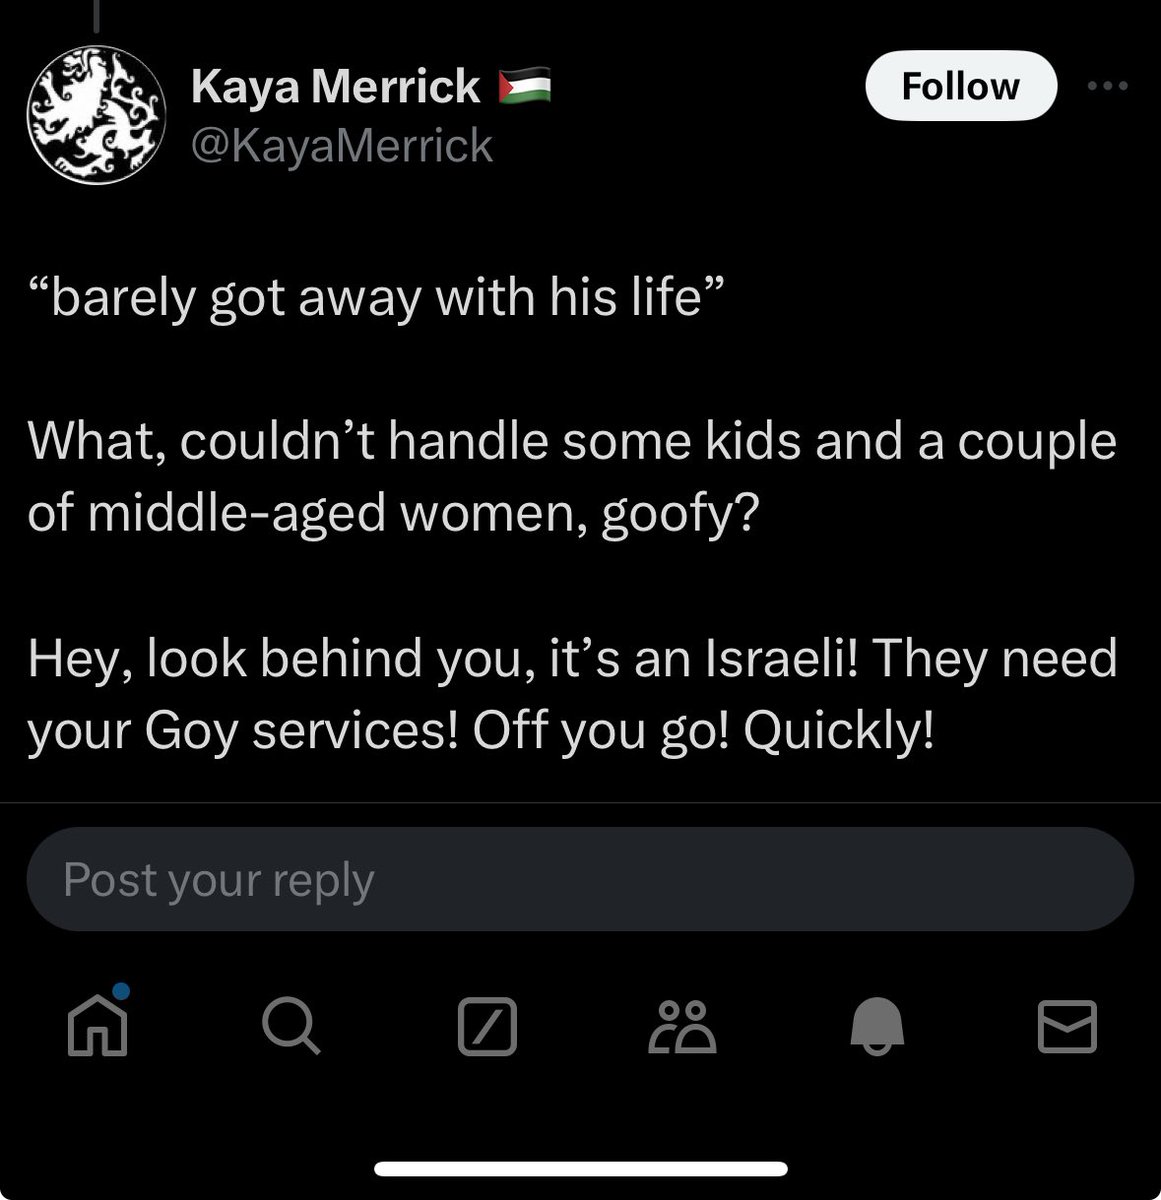 This Fakestine supporting account posted porn. And, not sure if he realizes this, but he’s asking the IDF  to rough up Fakestinian middle aged women. Also, I’m sure Hammas and Allan are you going to throw him off the building for posting porn.